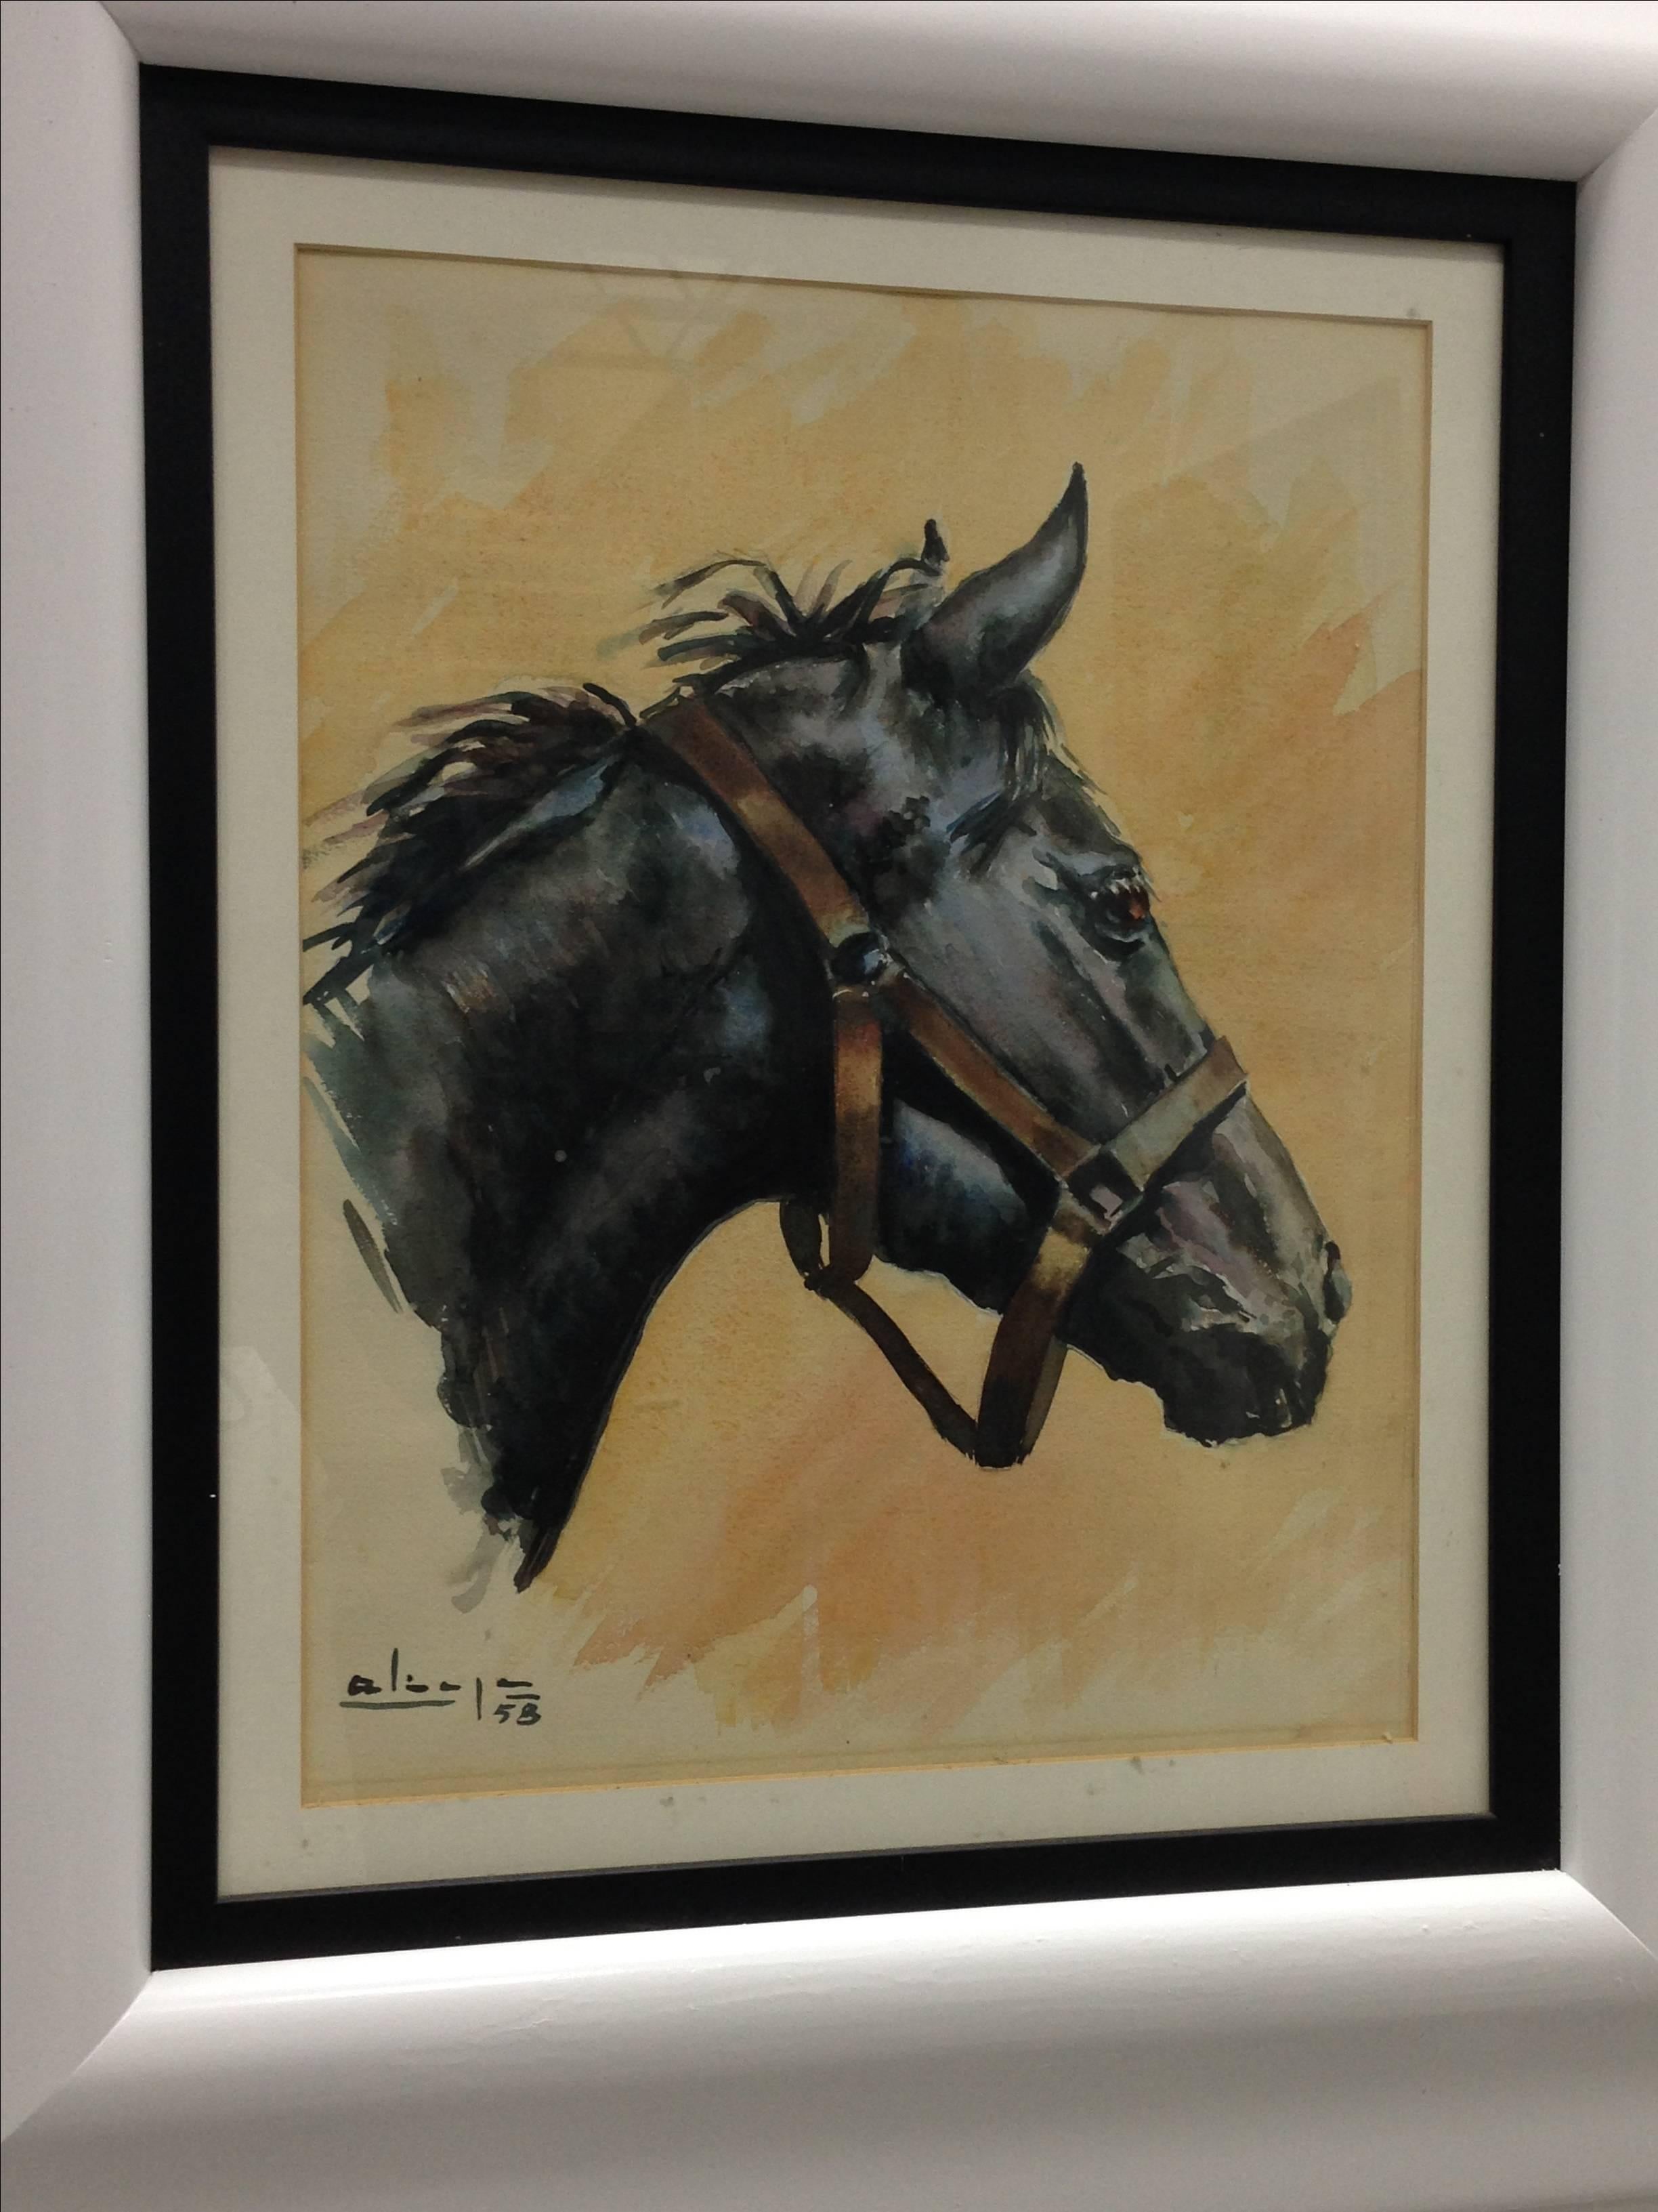 Spanish horse portrait, 1958

Beautiful horse portrait by Aliaga, circa 1958, Spain. 

Canvas measures: H 21 in x W 17 in x D 1 in
Frame dimensions 26.0